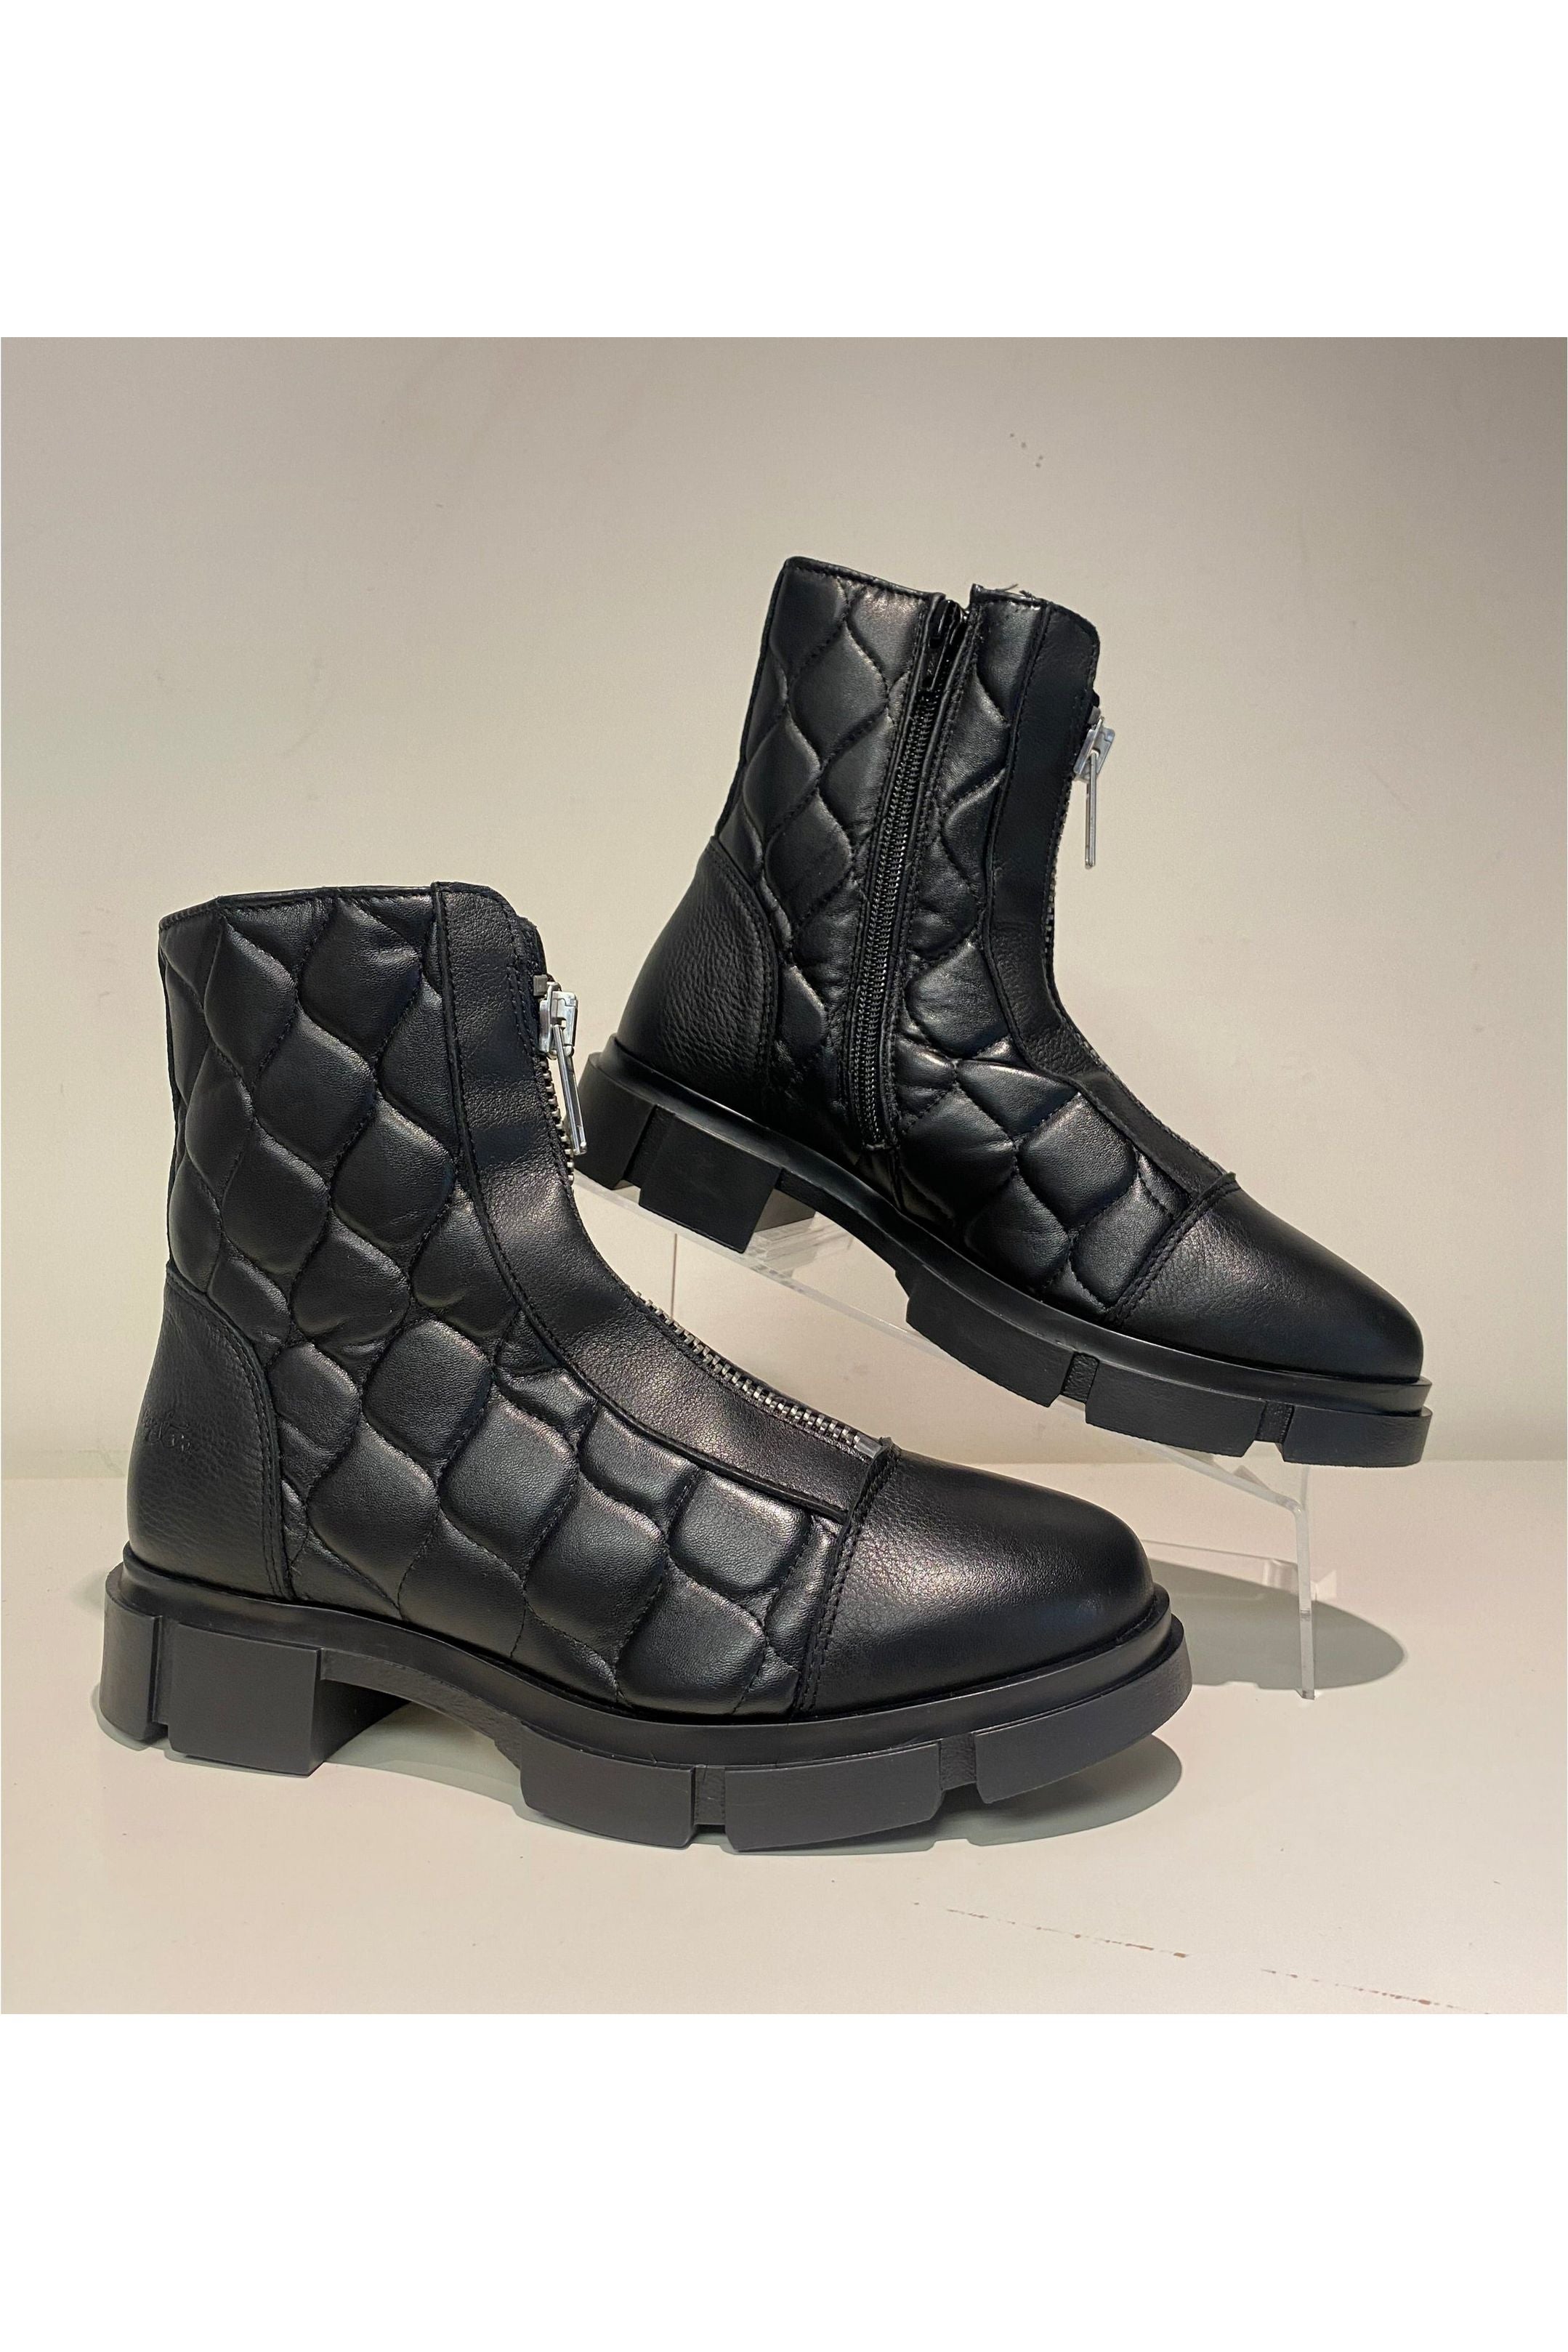 Bos & Co Quilted Ankle Boot - Style Lane, pair, black